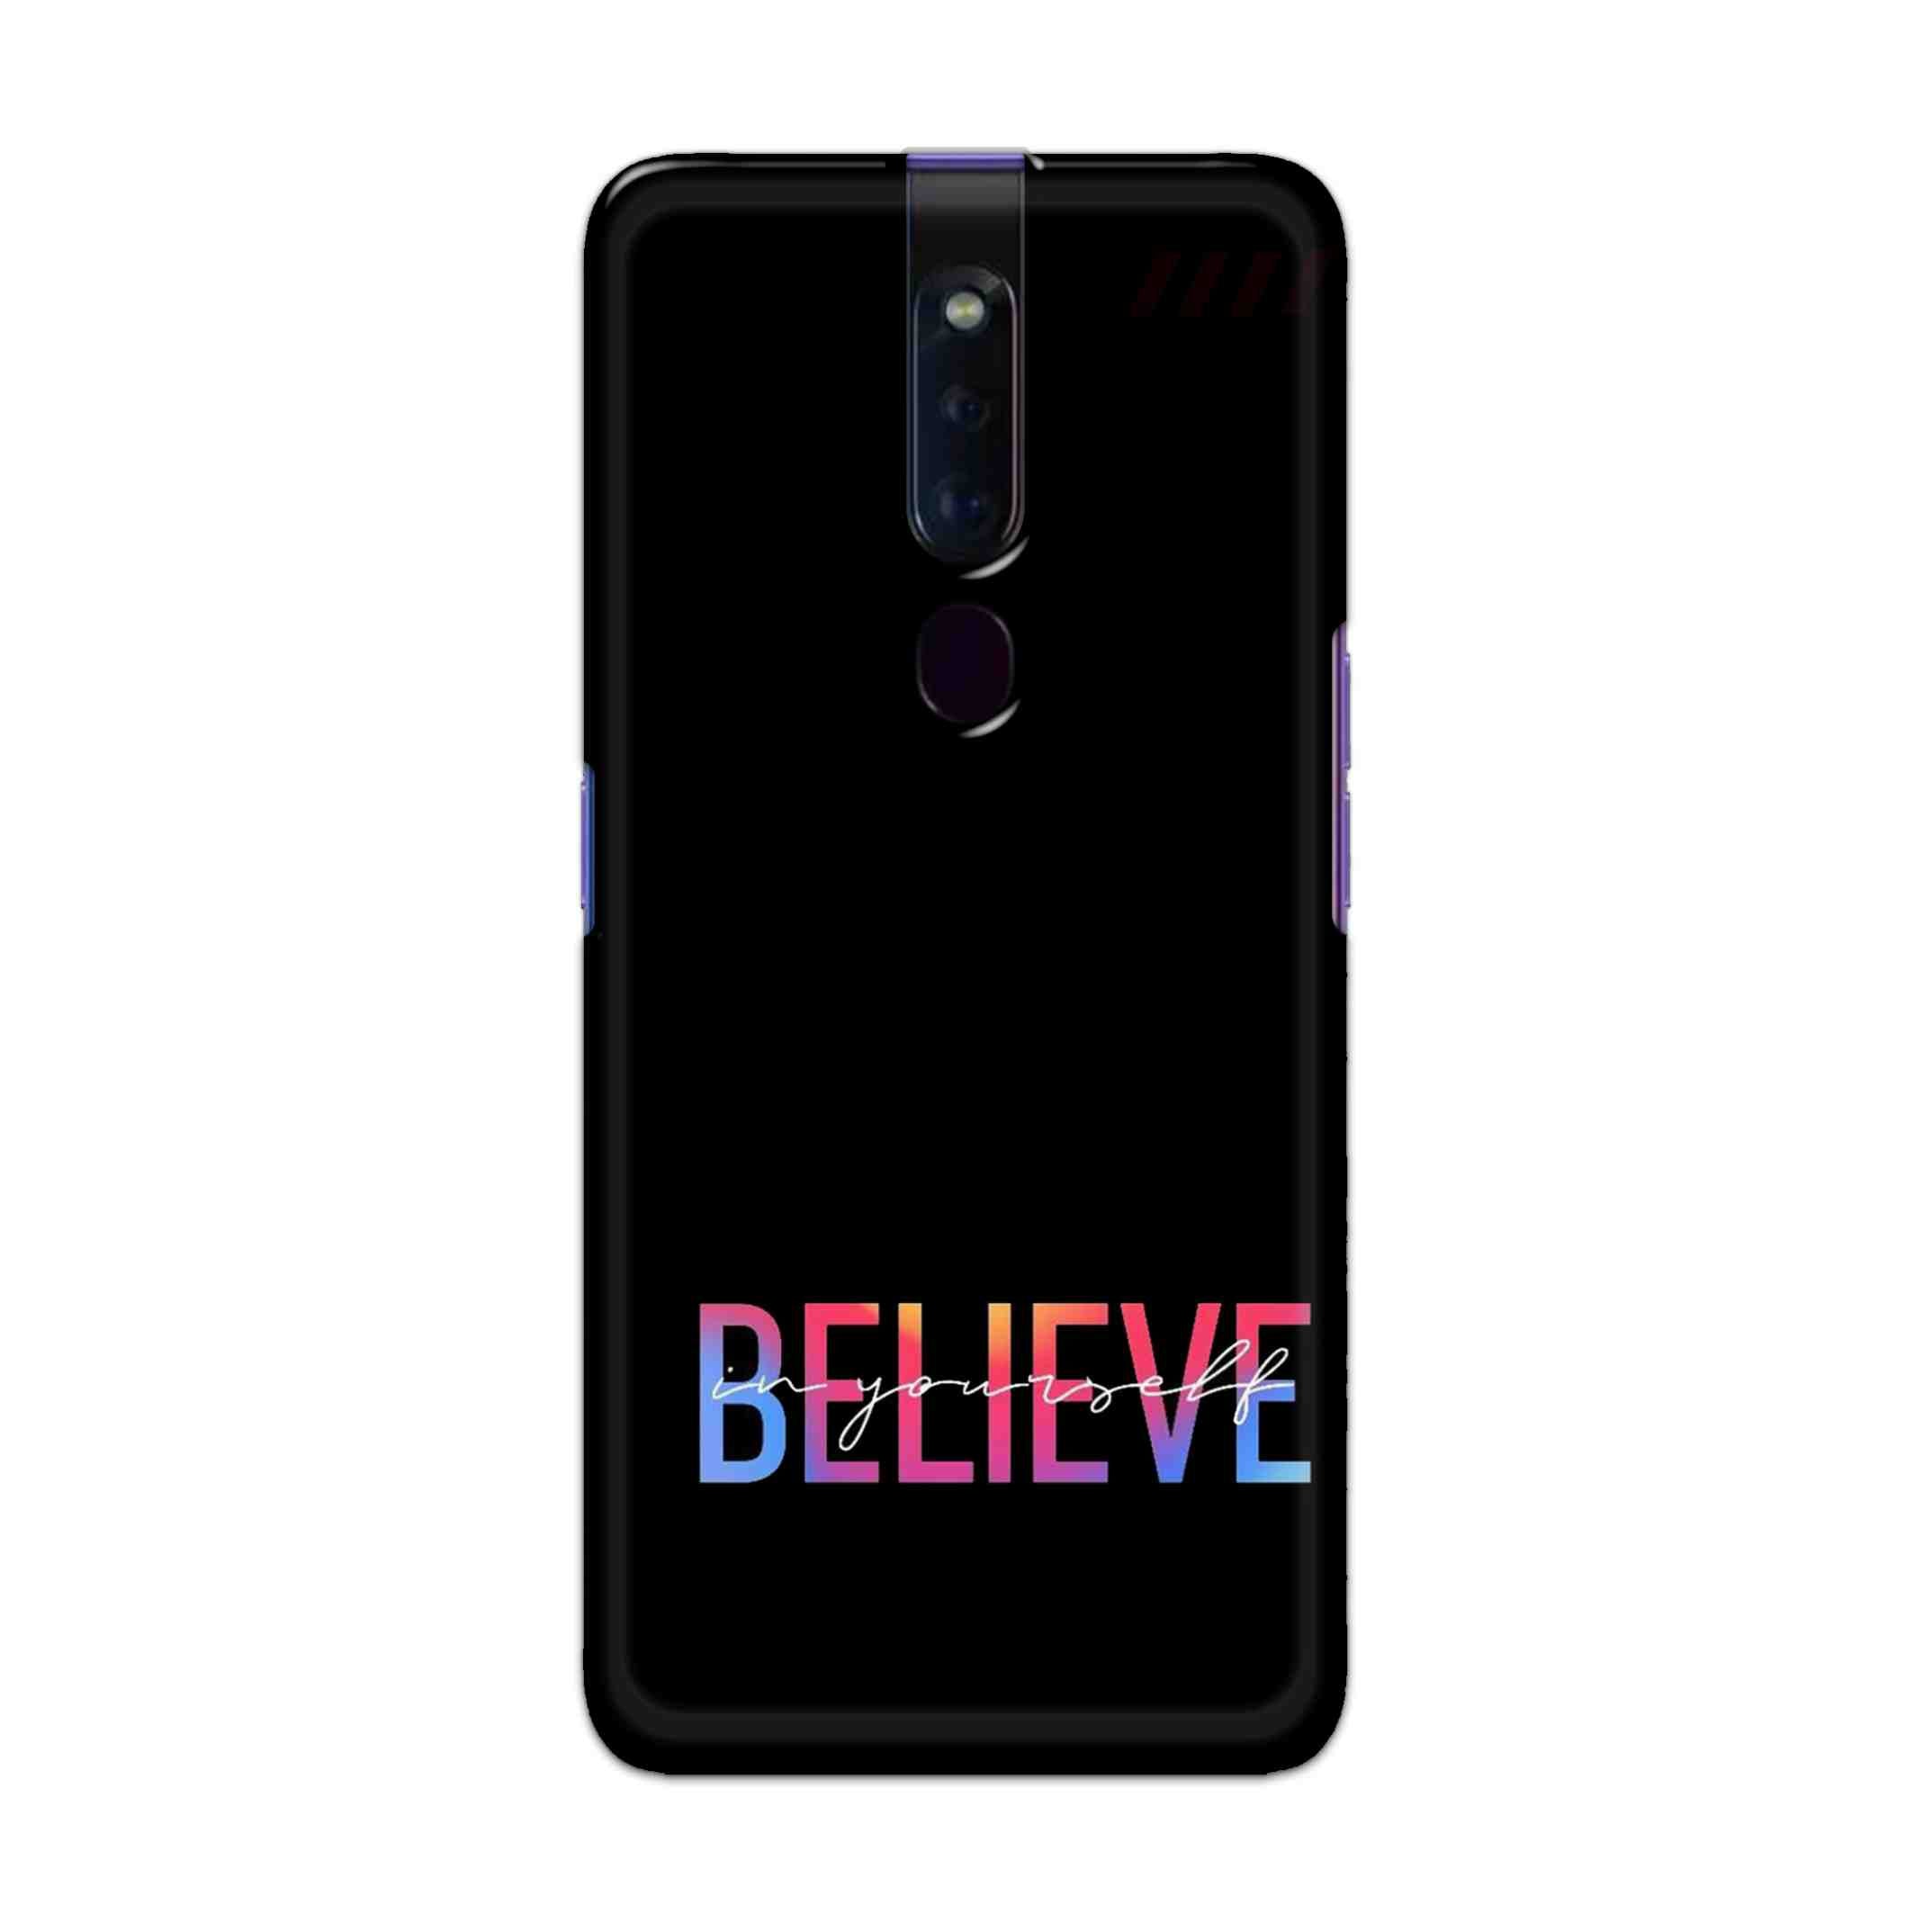 Buy Believe Hard Back Mobile Phone Case Cover For Oppo F11 Pro Online